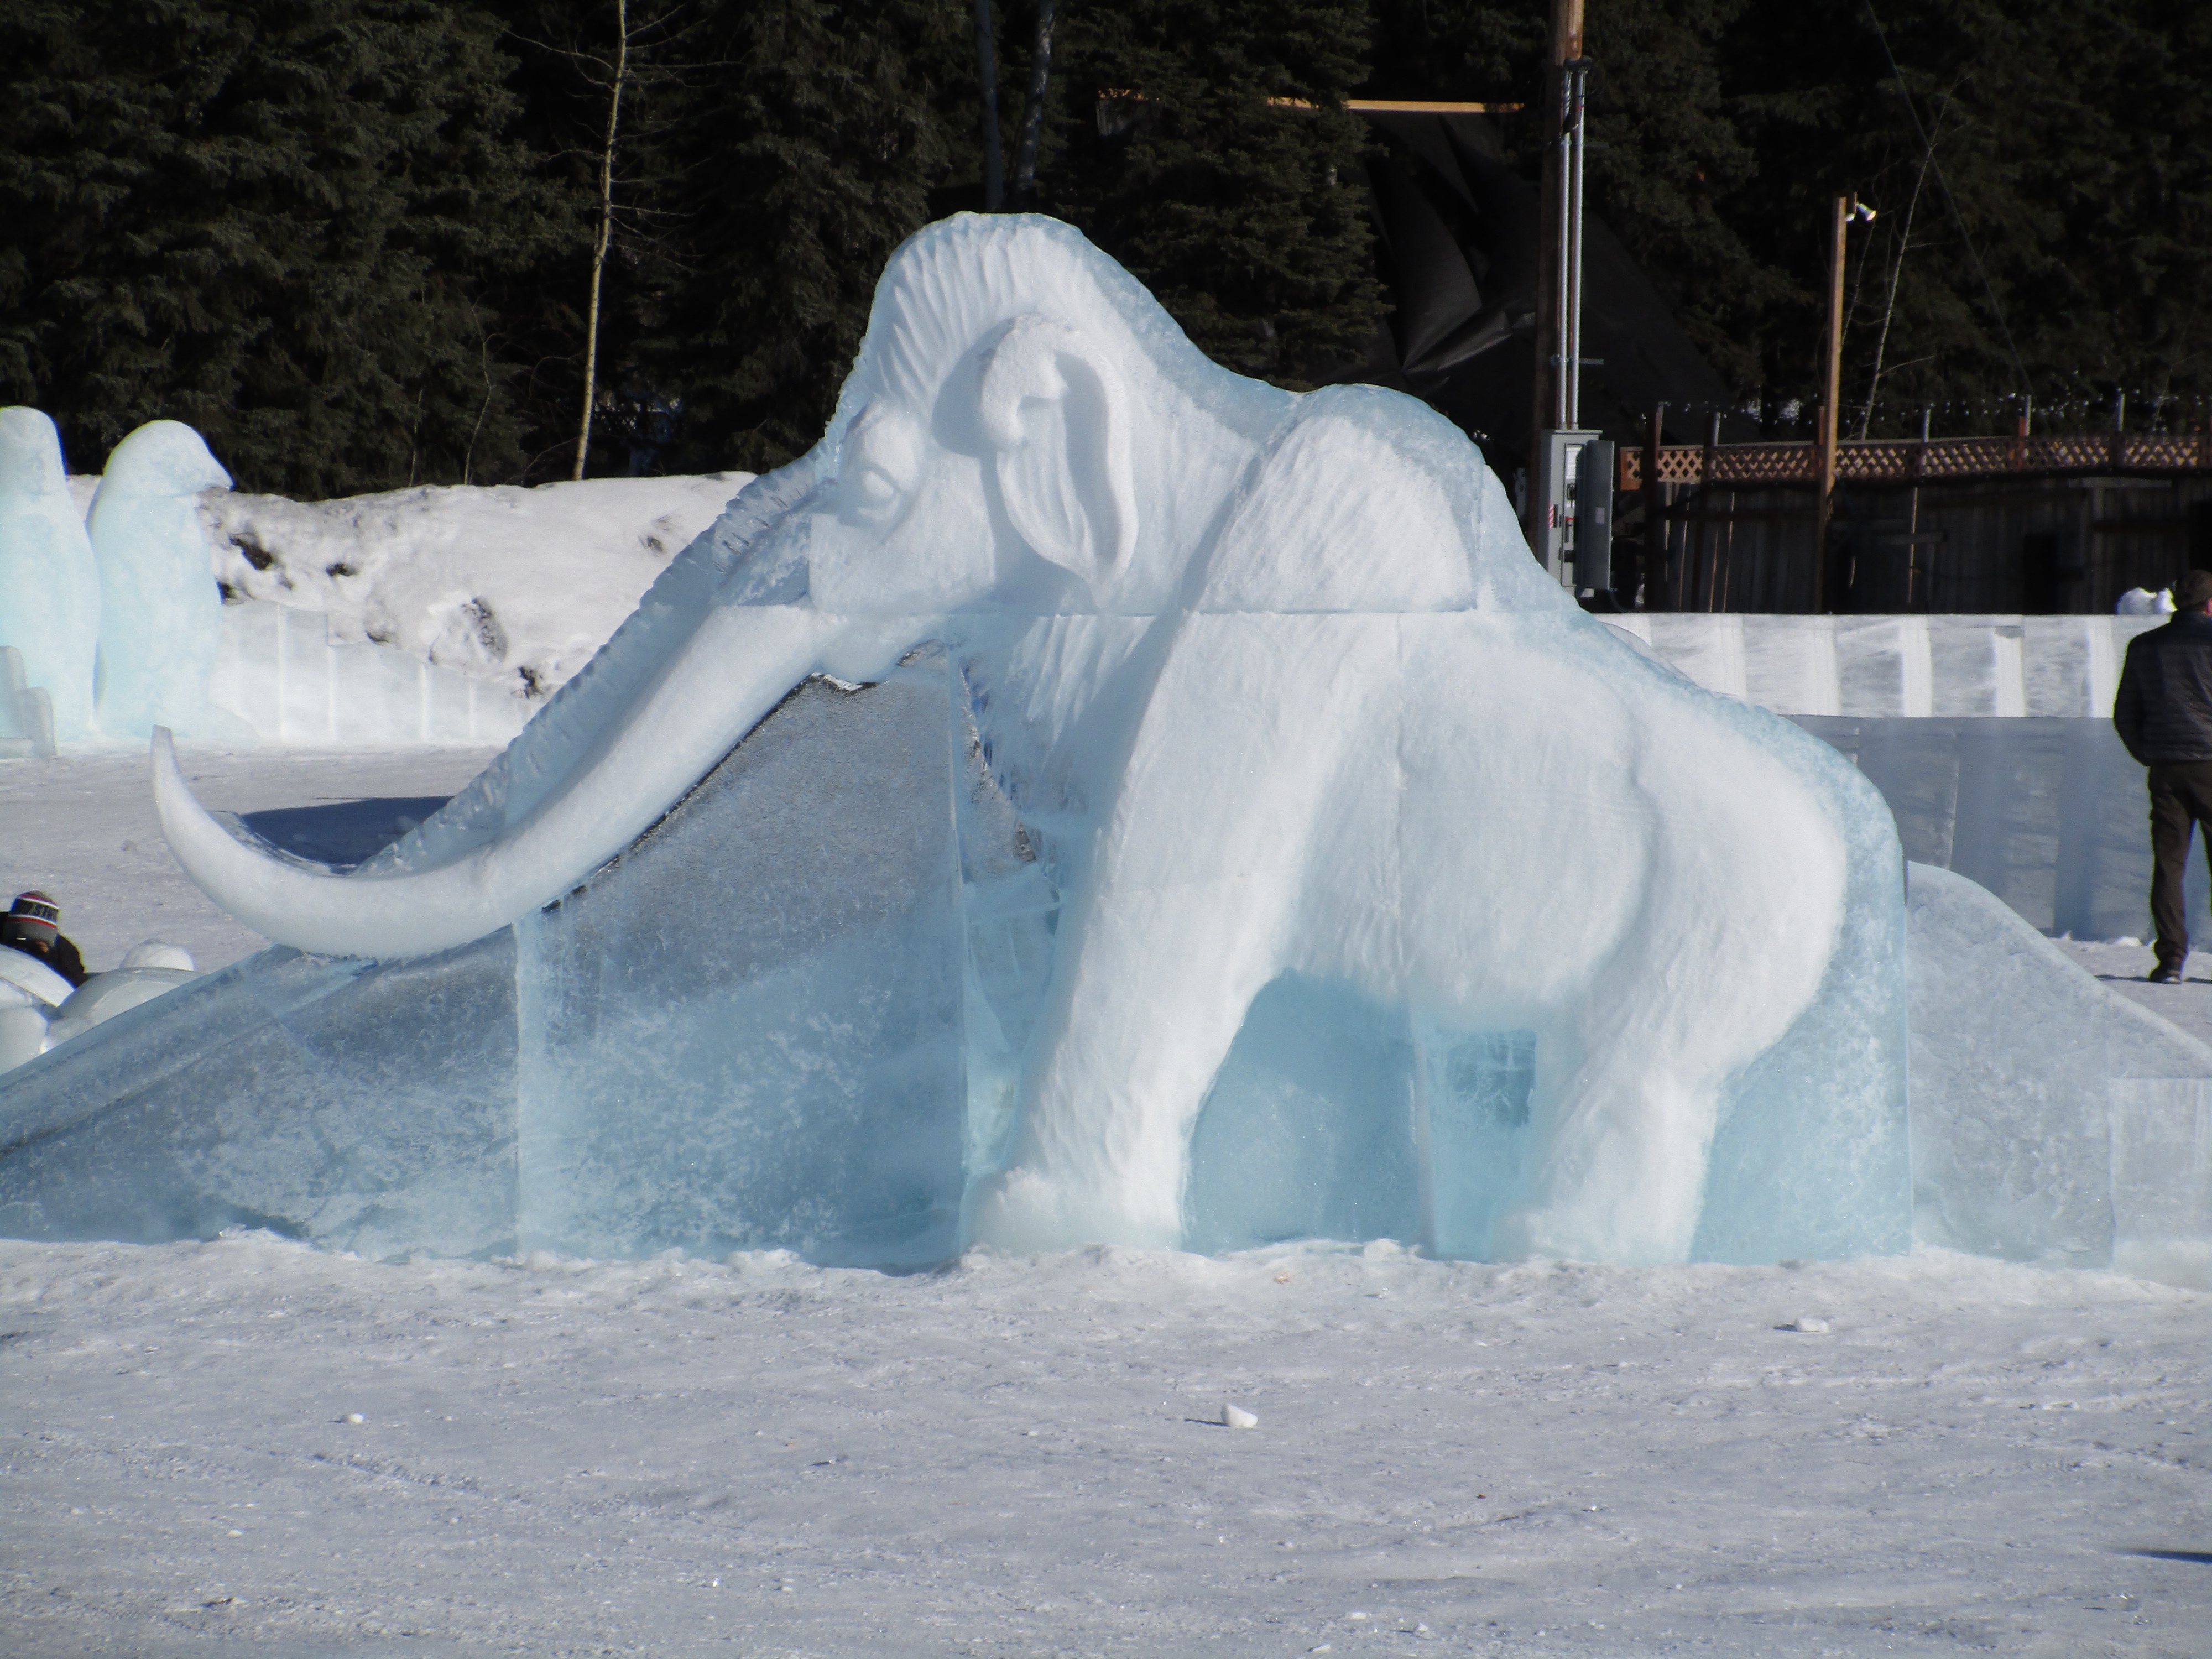 An ice sculpture of a mammoth doubles as a slide at the 2016 BP World Ice Art Championships in Fairbanks. (Mike Dunham / Alaska Dispatch News)